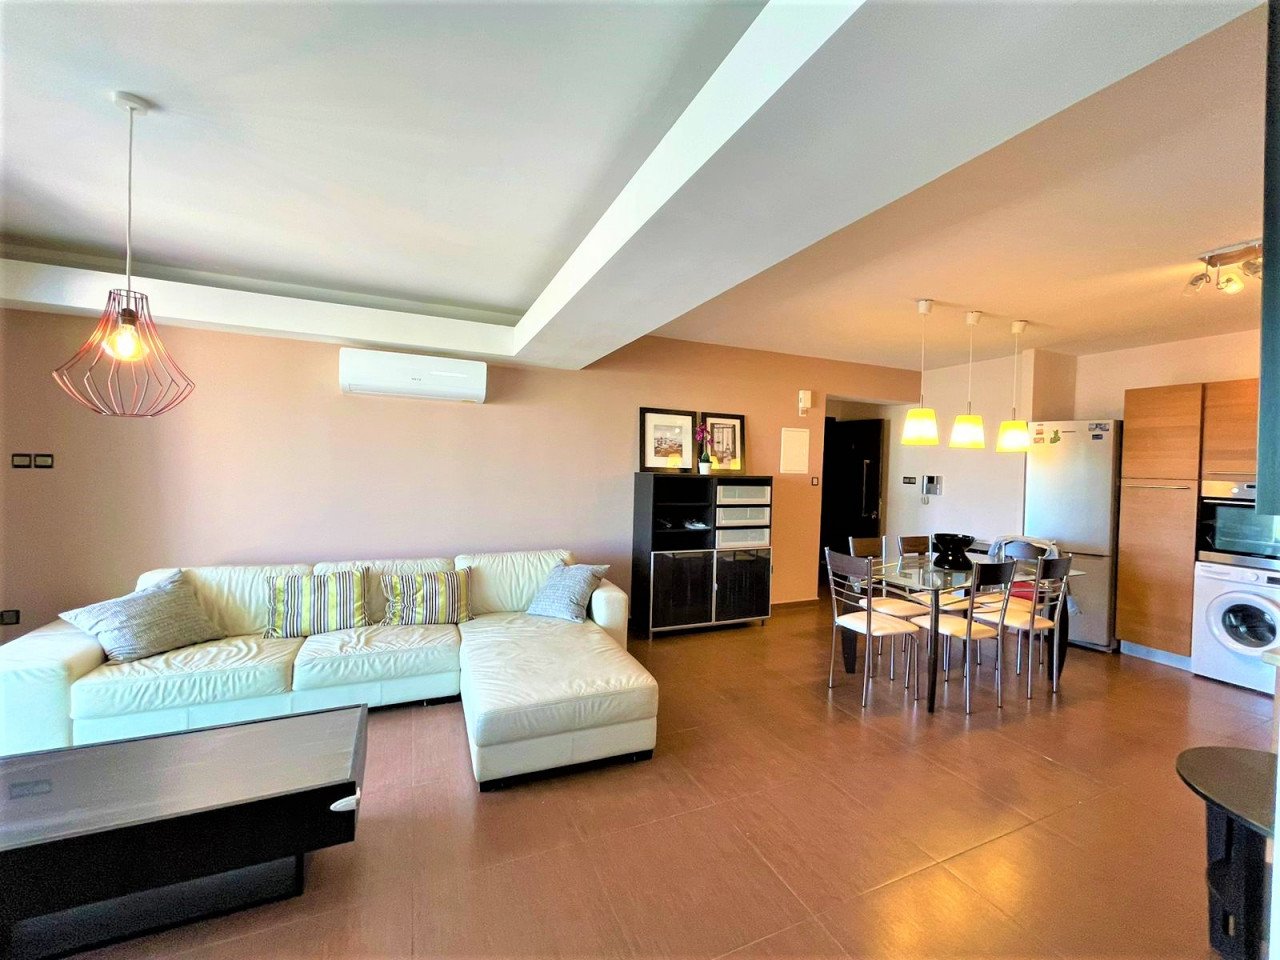 Property for Sale: Apartment (Flat) in Paralimni, Famagusta  | Key Realtor Cyprus